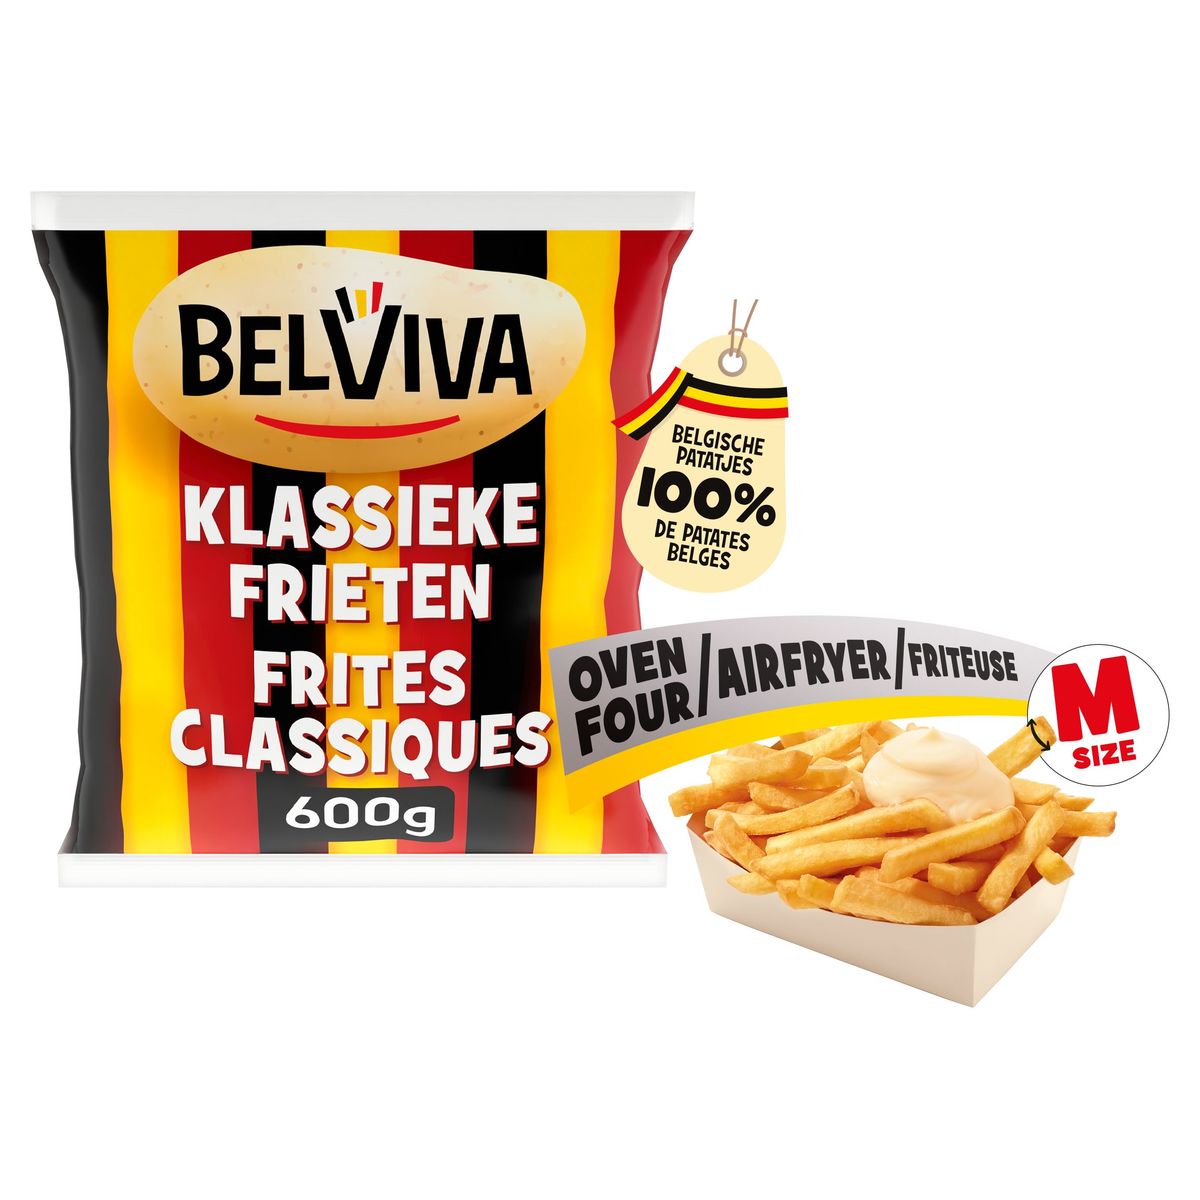 Belviva Frites Classiques Four Airfryer Friteuse M Size 600 g